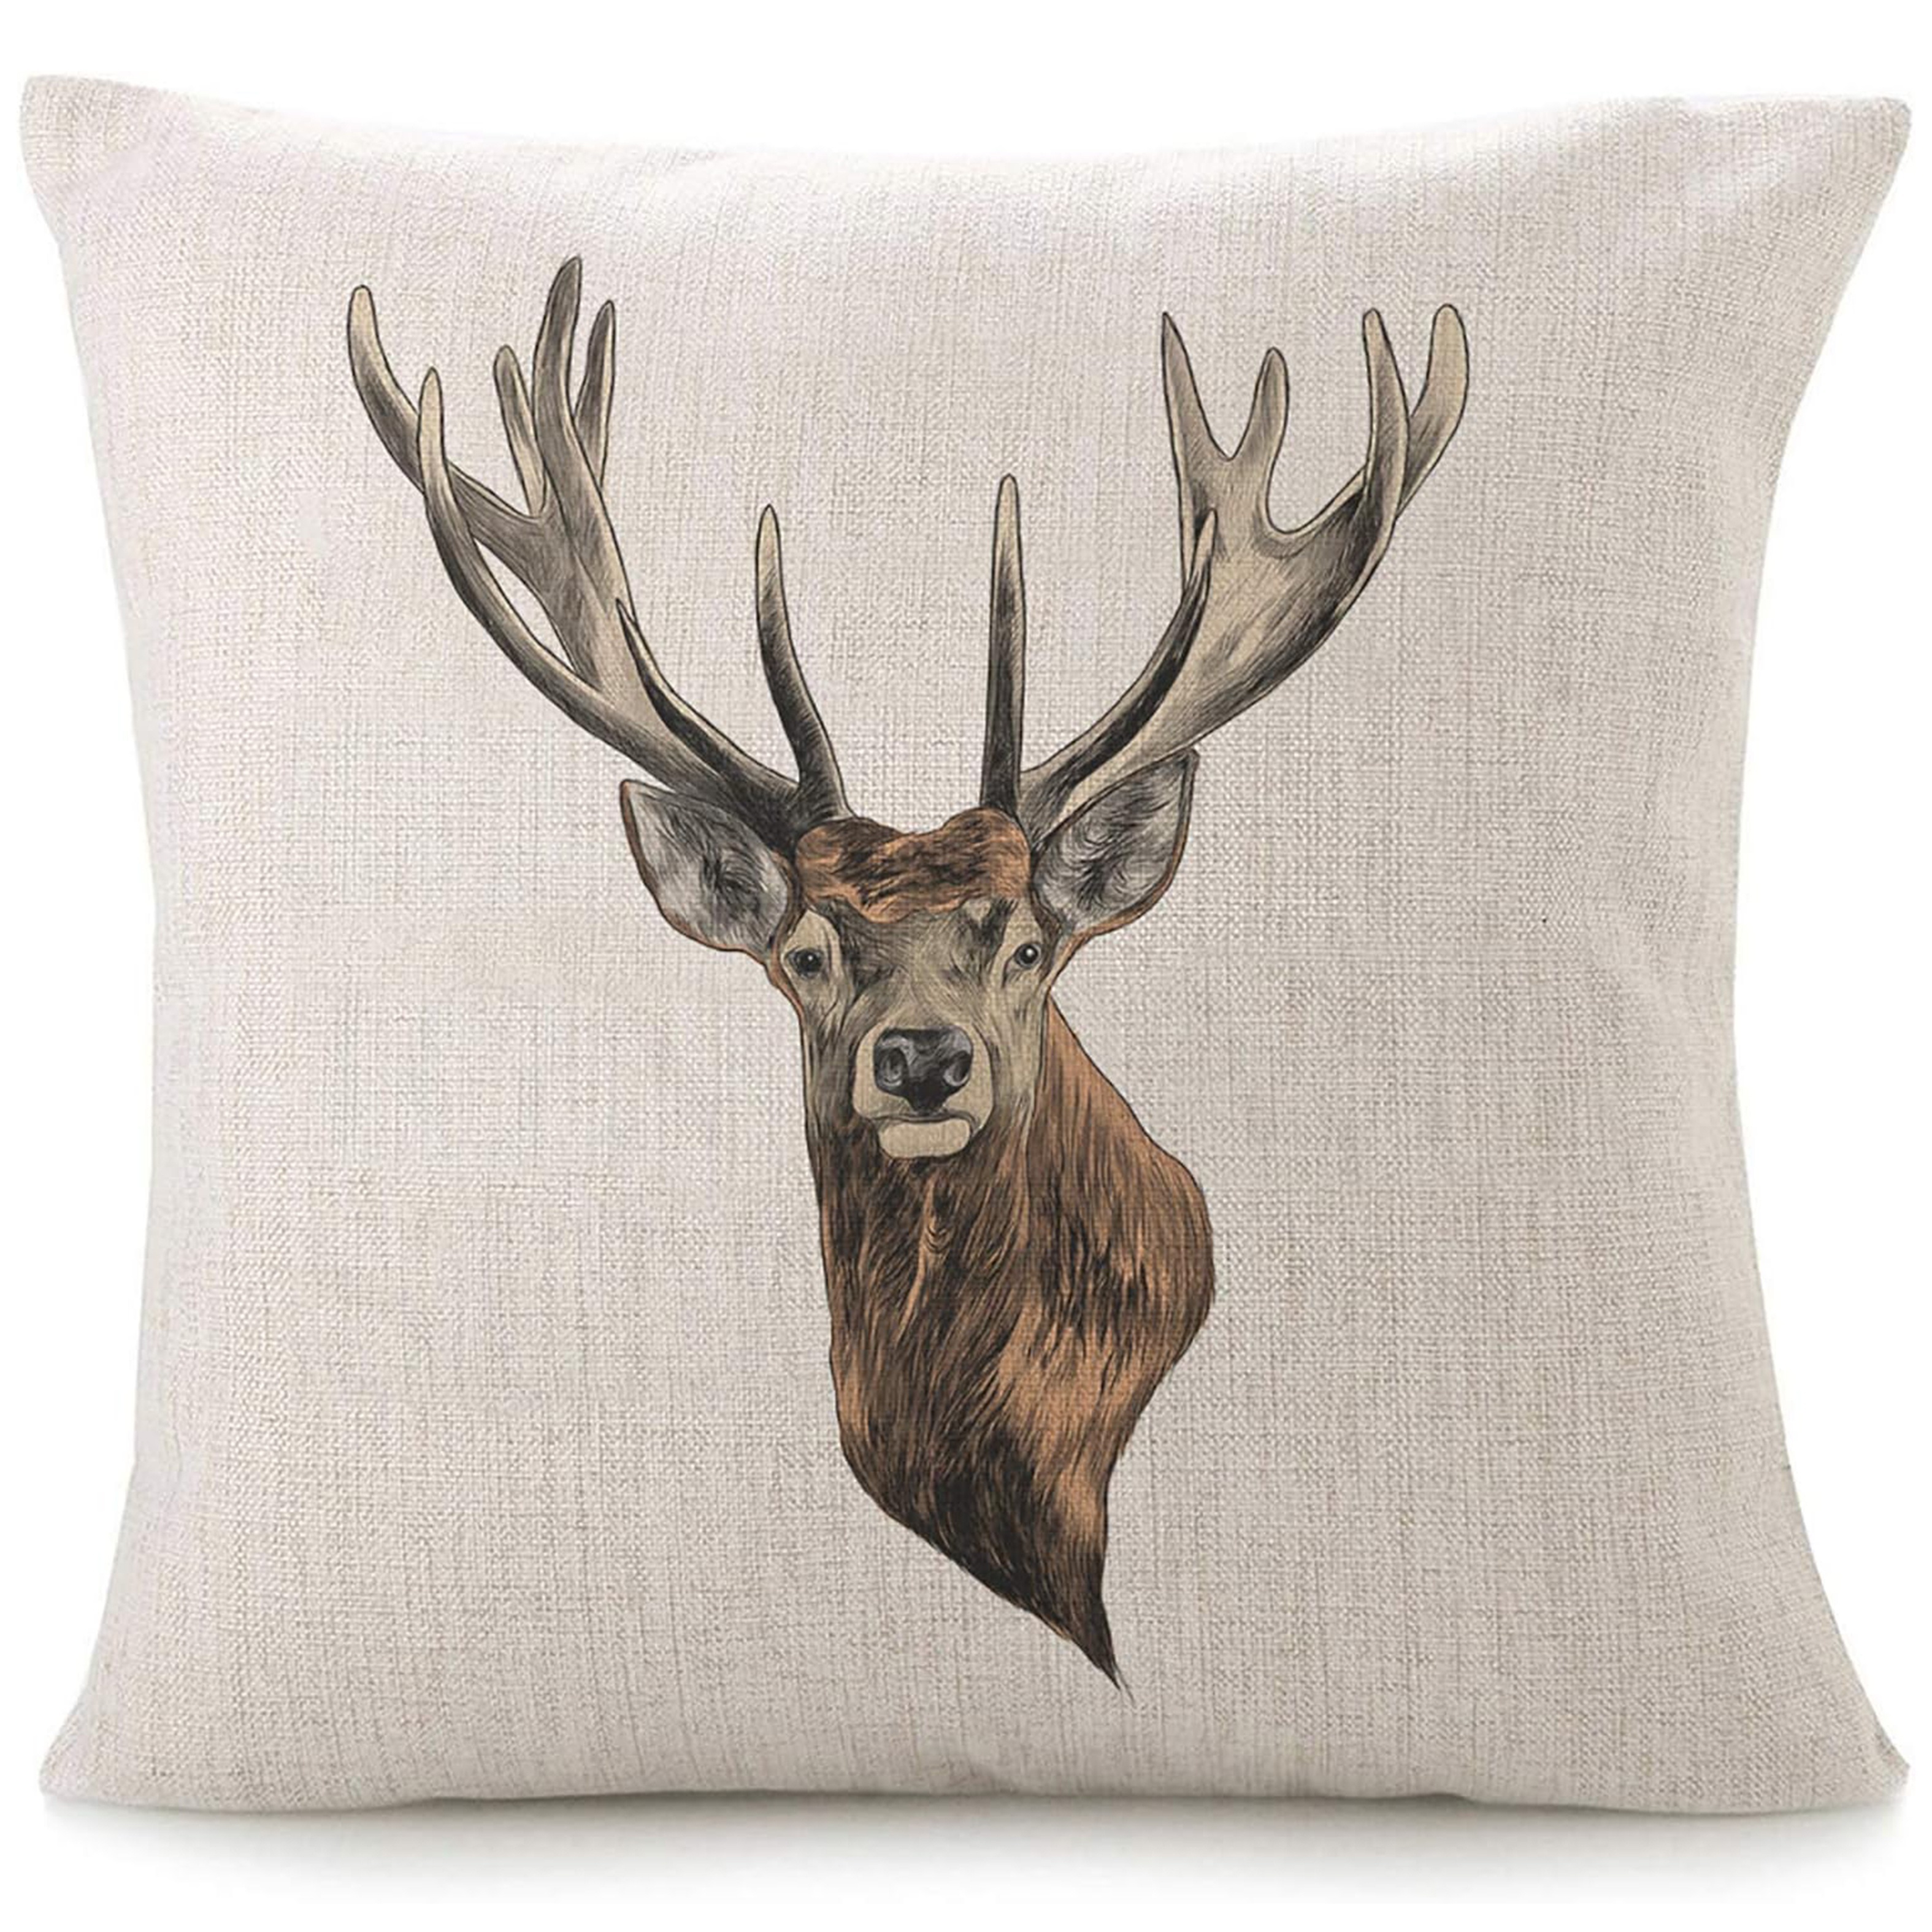 

Contemporary Linen Throw Pillow Cover, Deer Head Wildlife Print, Decorative Cushion Case For Sofa And Bed, Machine Washable With Zipper Closure, Woven Single Sided Animal Pattern - 1pc Without Insert